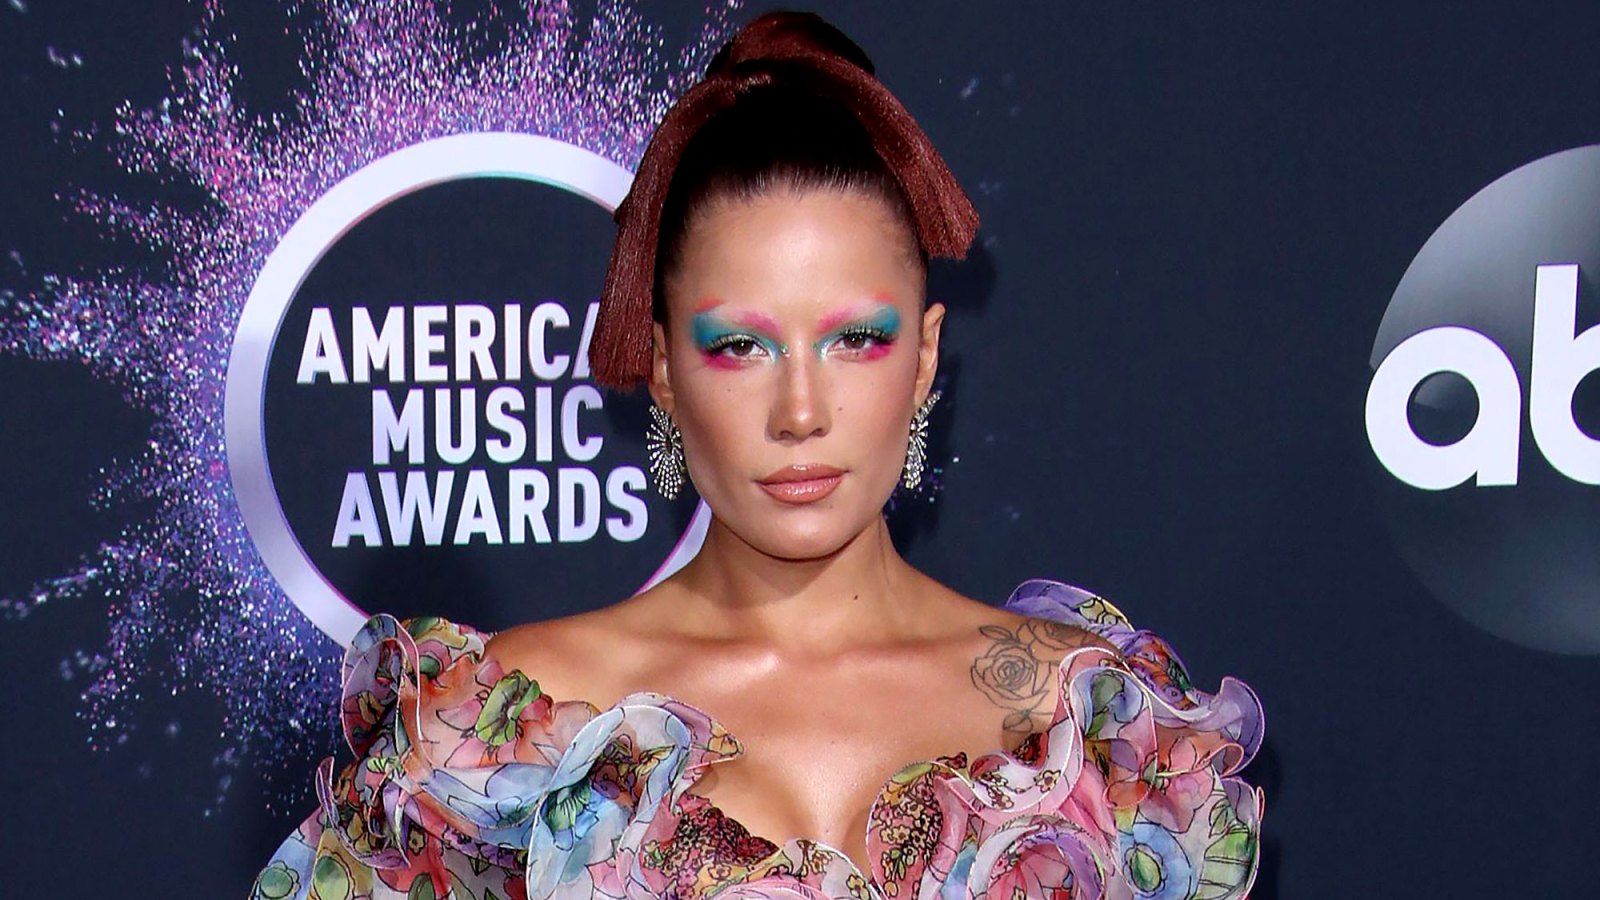 Stunning! Halsey Makes 1st Red Carpet Appearance After Giving Birth — and She Looks Amazing